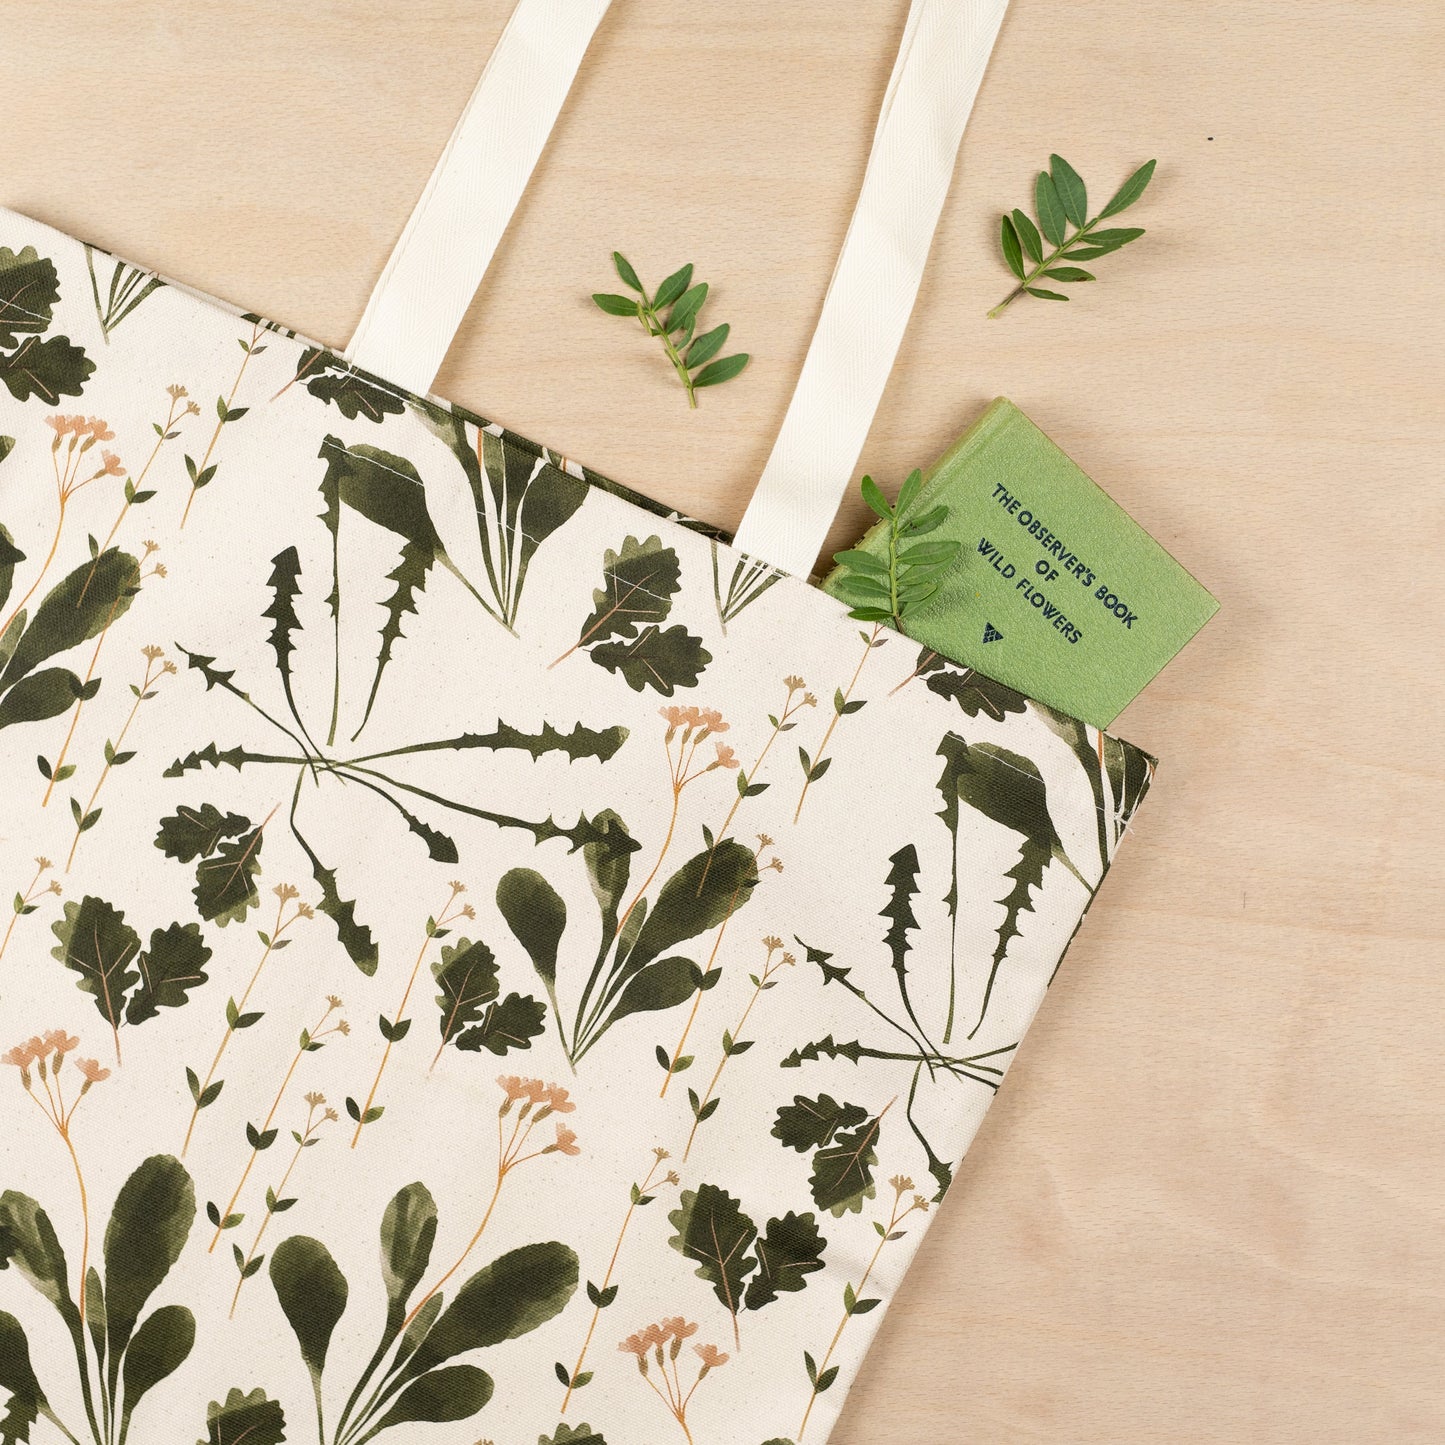 Load image into Gallery viewer, Lifestyle shot up close of tote bag on a wooden surface with a green book partially out of the top.
